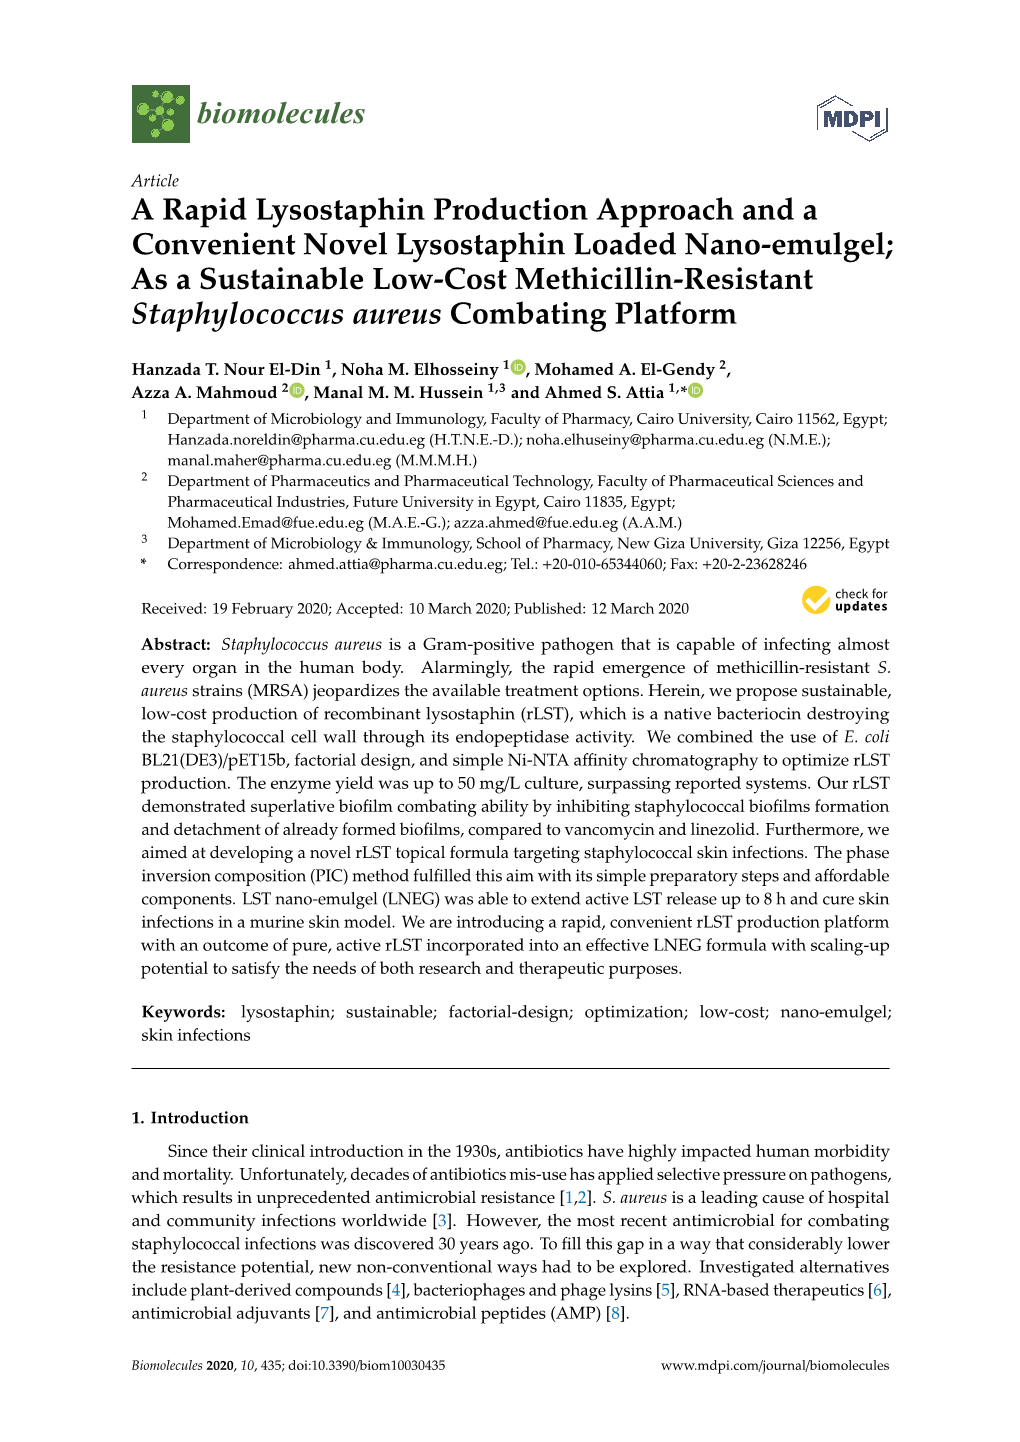 A Rapid Lysostaphin Production Approach and a Convenient Novel